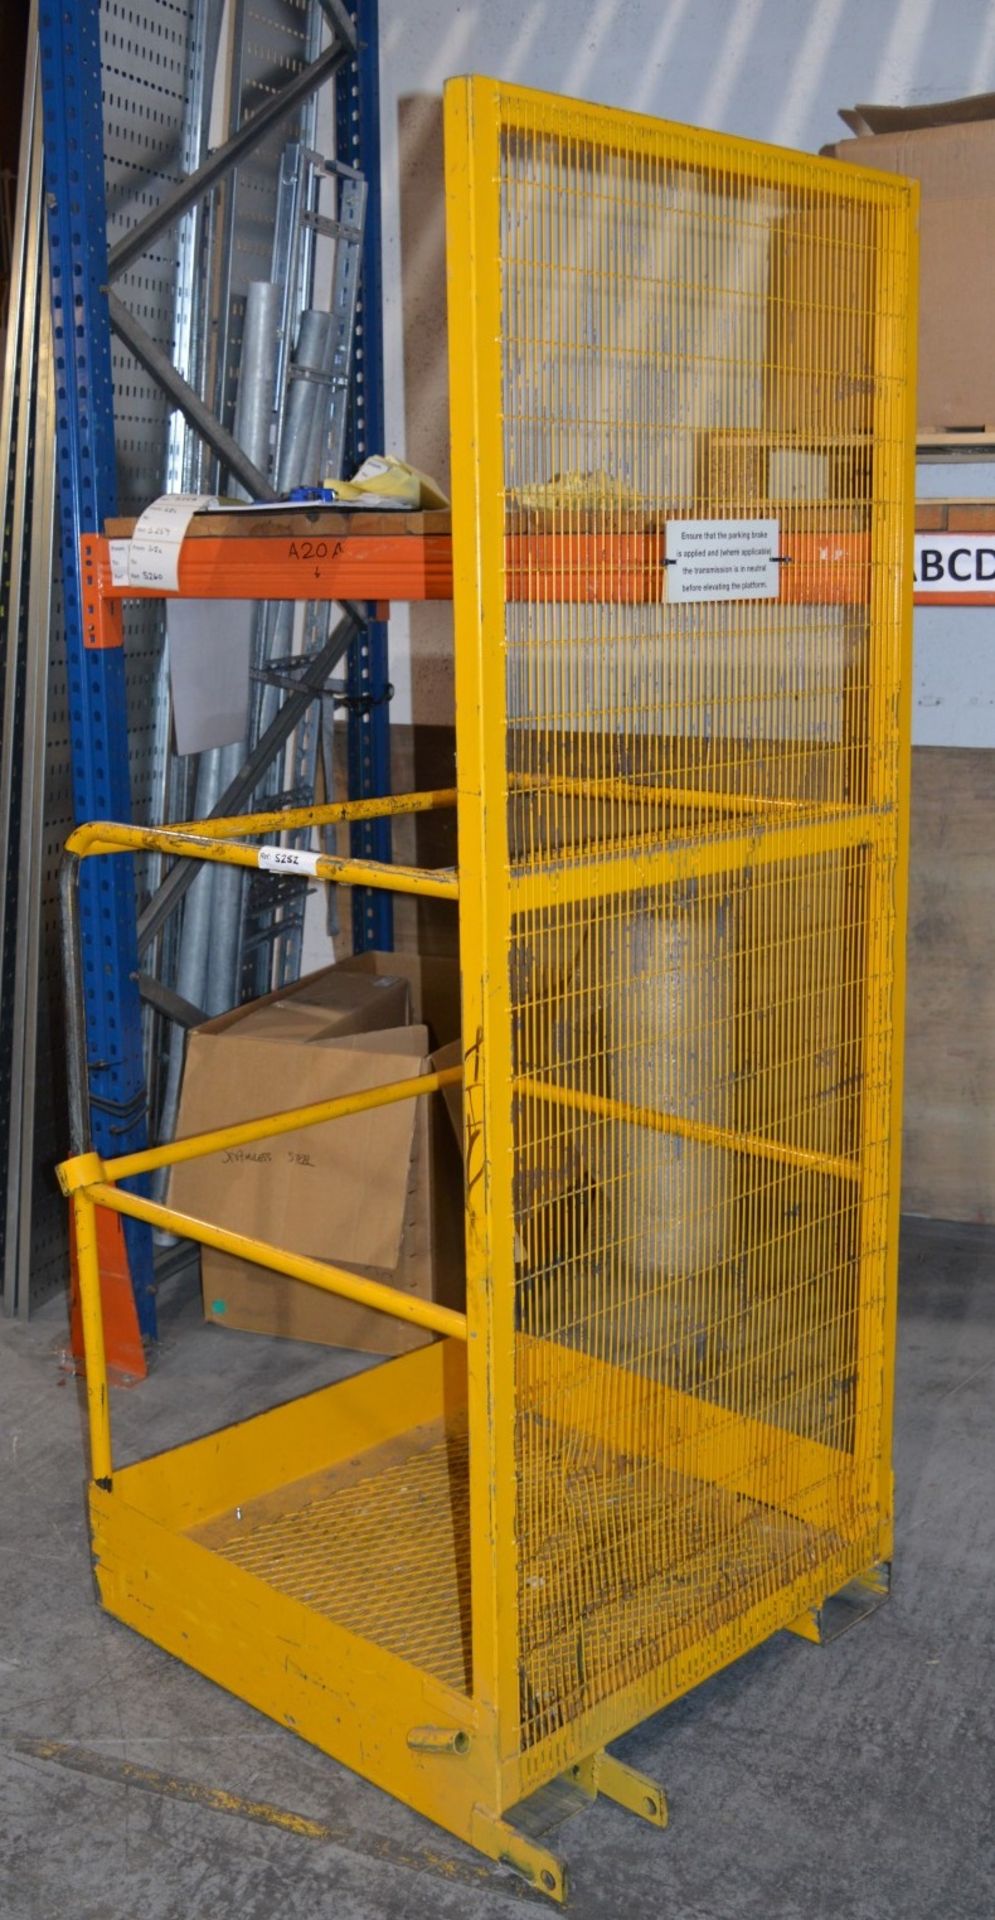 1 x One Man Access Platform Forklift Truck Cage - Type WP SP MK1 - Features Climb Through Bars Rigid - Image 7 of 7